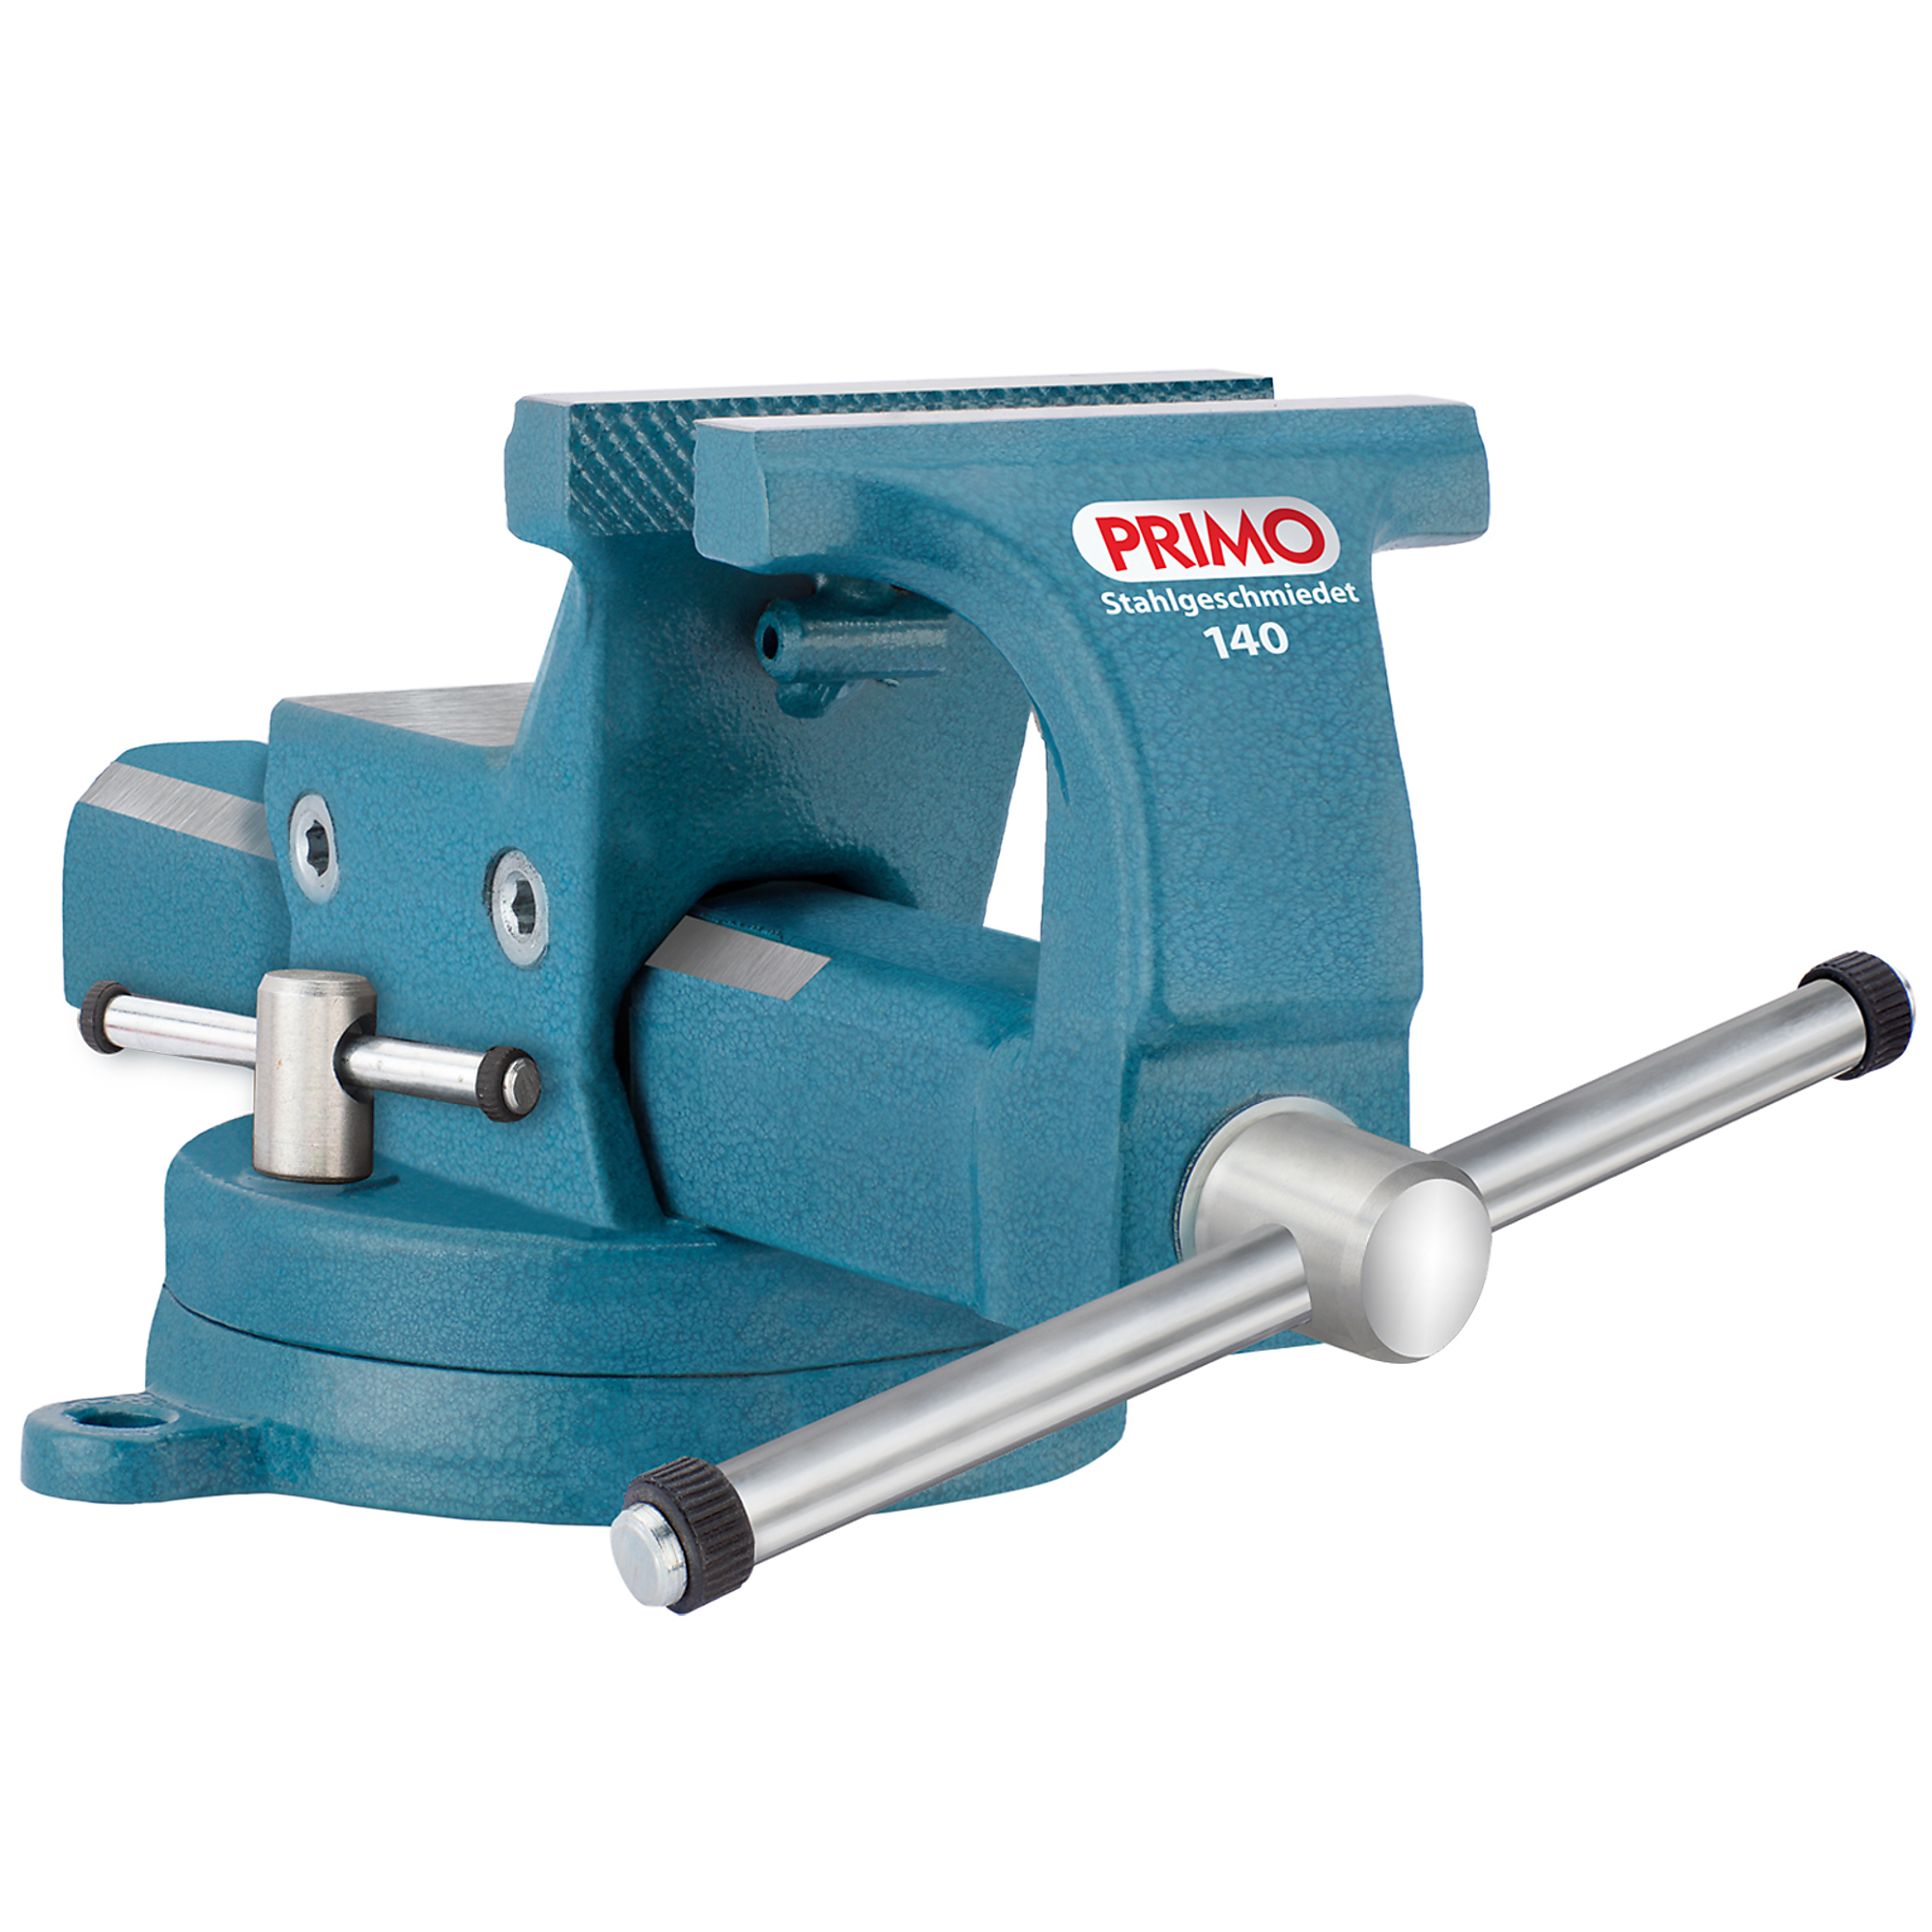 KANCA, PRIMO BENCH VISE w. SWIVEL BASE 100 MM - 4Inch, Jaw Width 4 in, Jaw Capacity 4.5 in, Model Primo Bench Vise